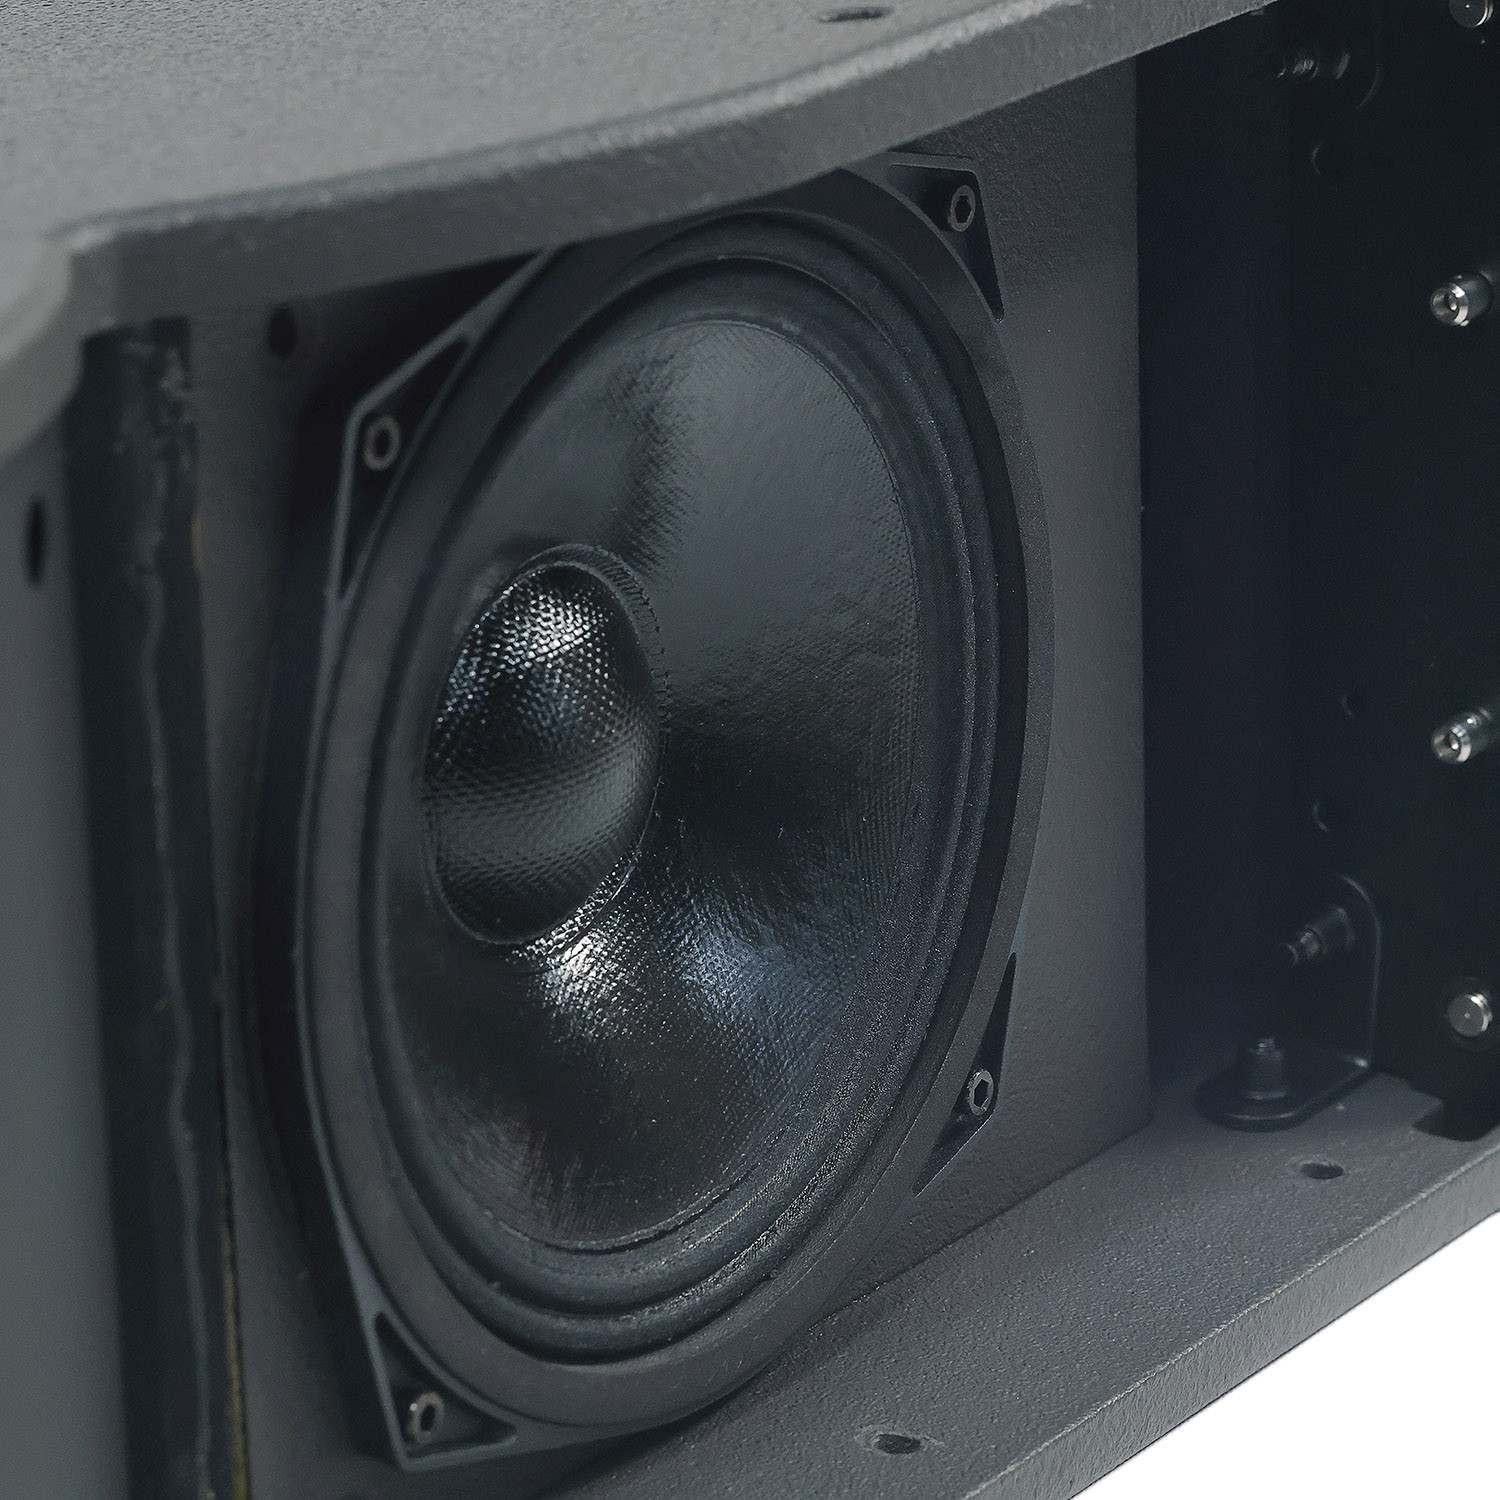 Some common questions about neodymium magnetic speakers and ordinary speakers